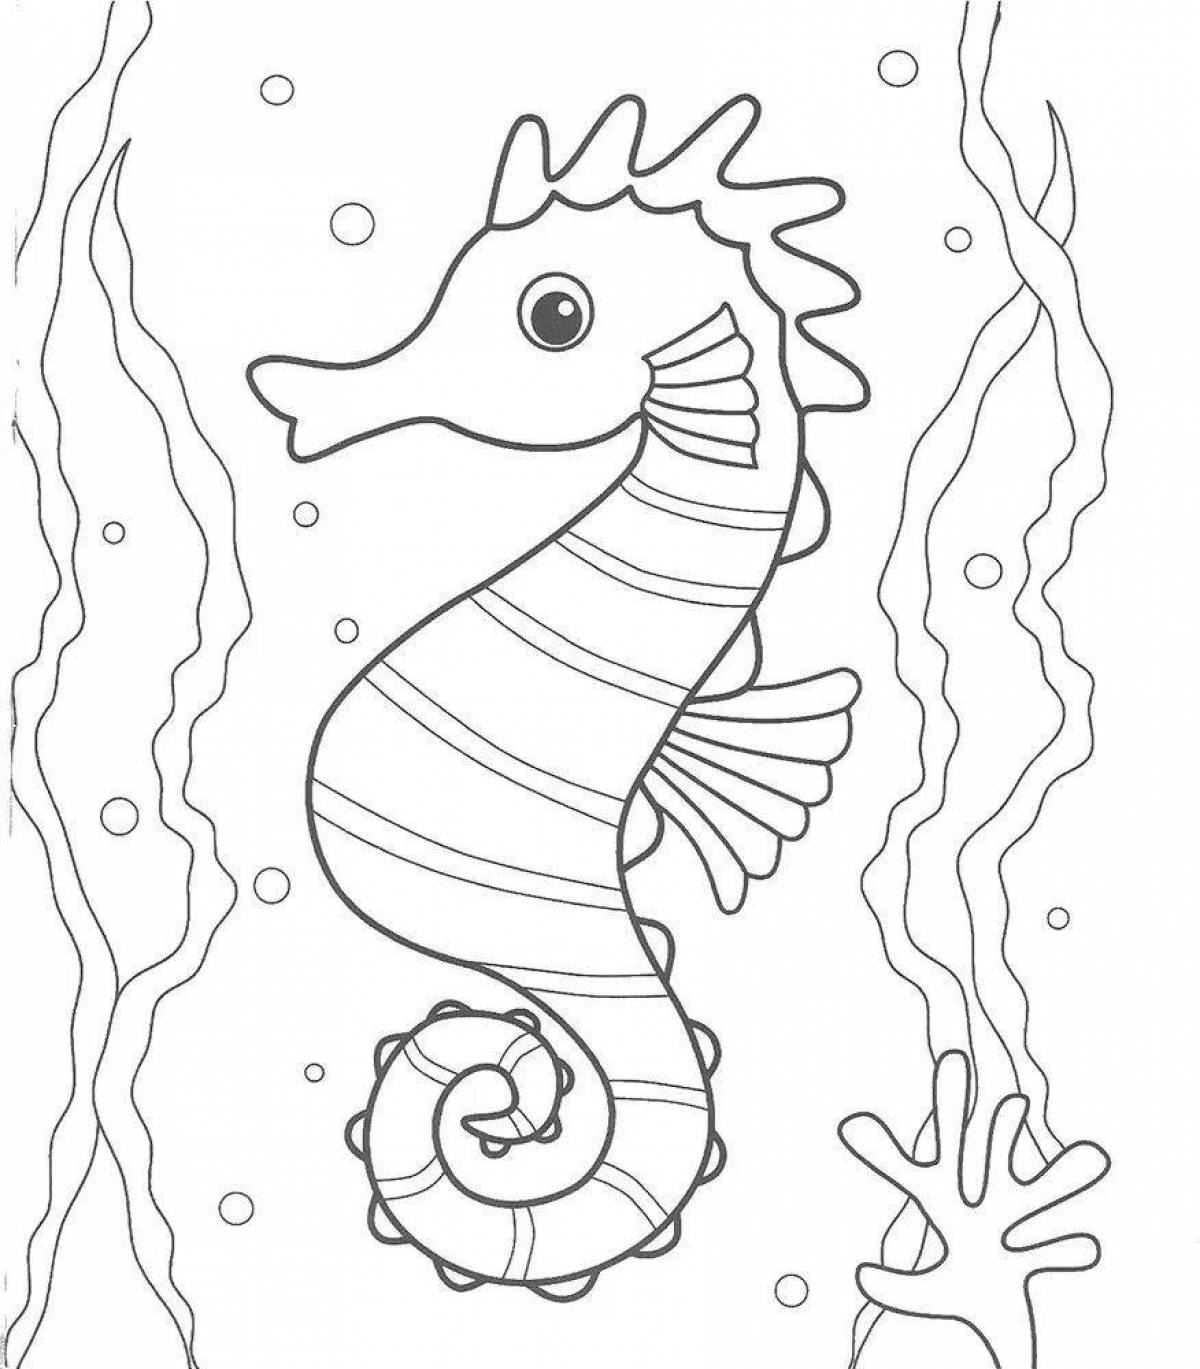 Live marine life coloring book for children 6-7 years old